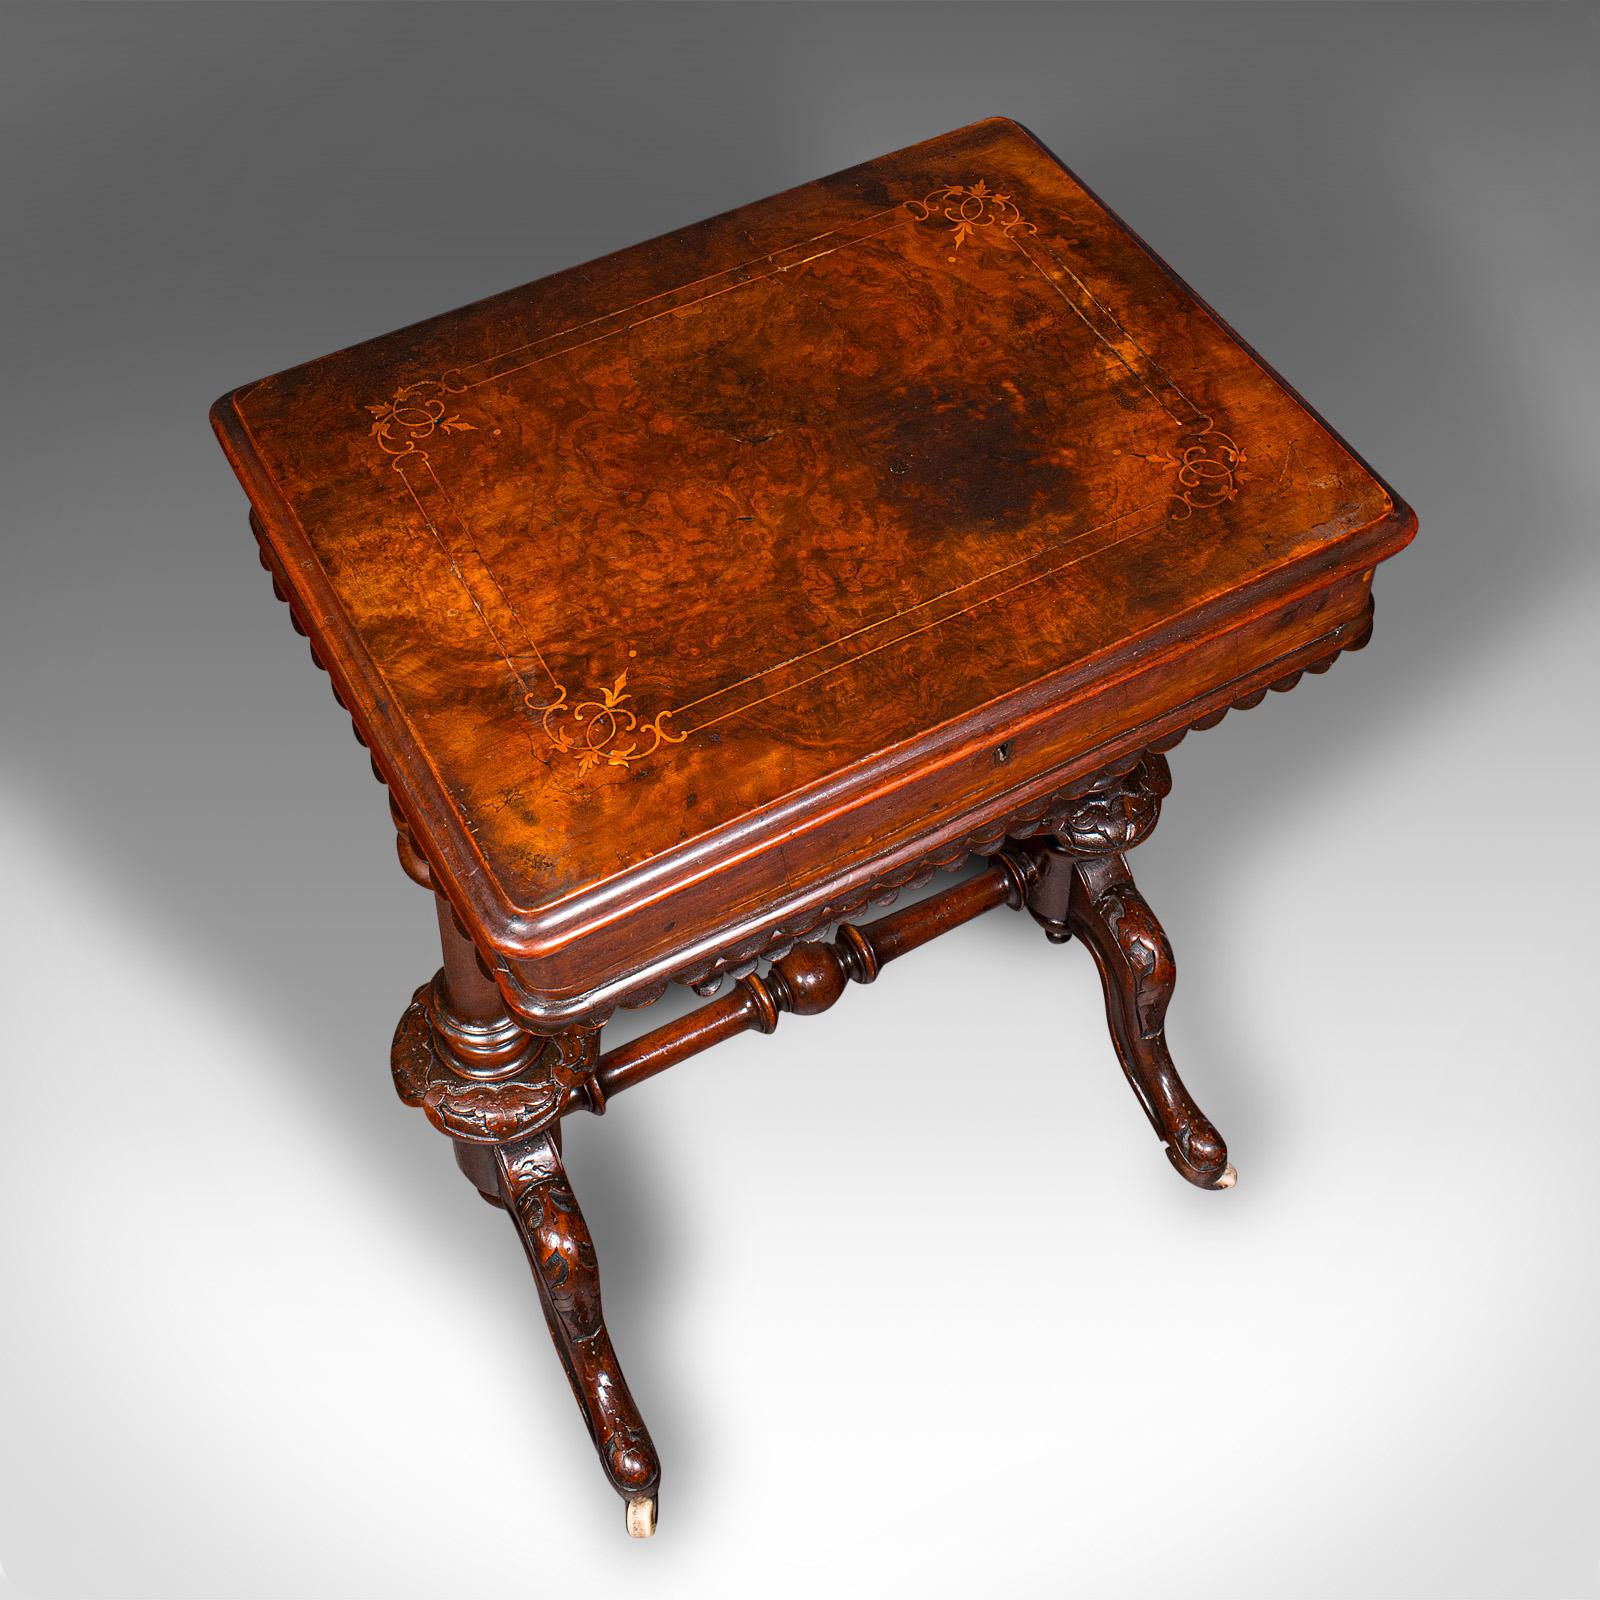 Antique Ladies Work Table, English, Burr Walnut, Sewing Table, Victorian, C.1850 For Sale 1